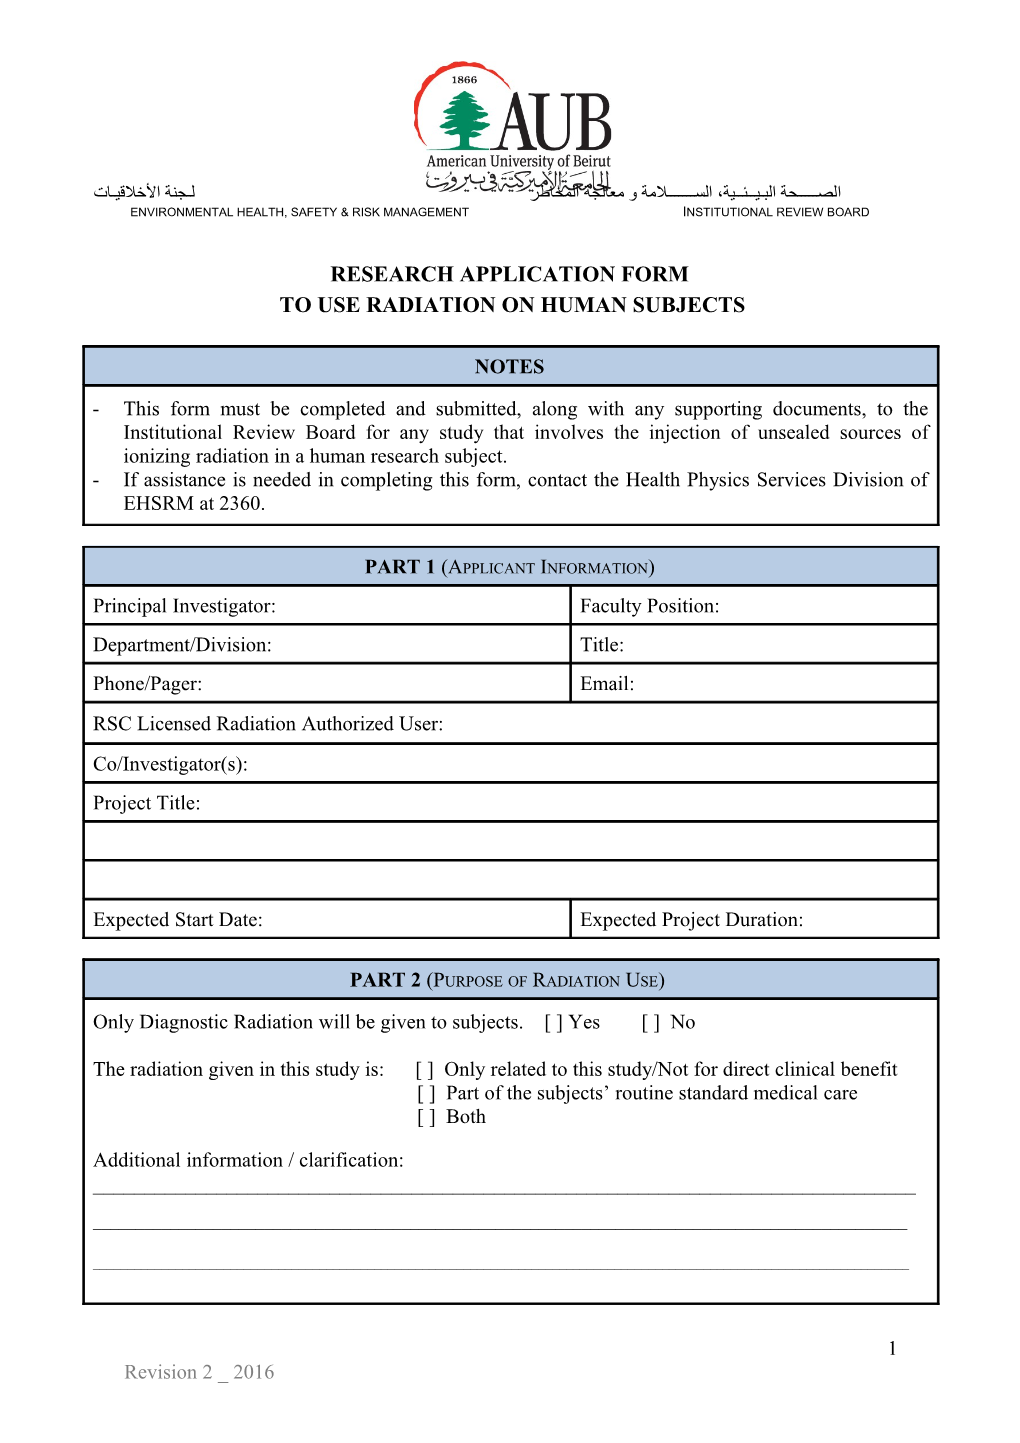 Application for the Use of Radiation on Human Subject